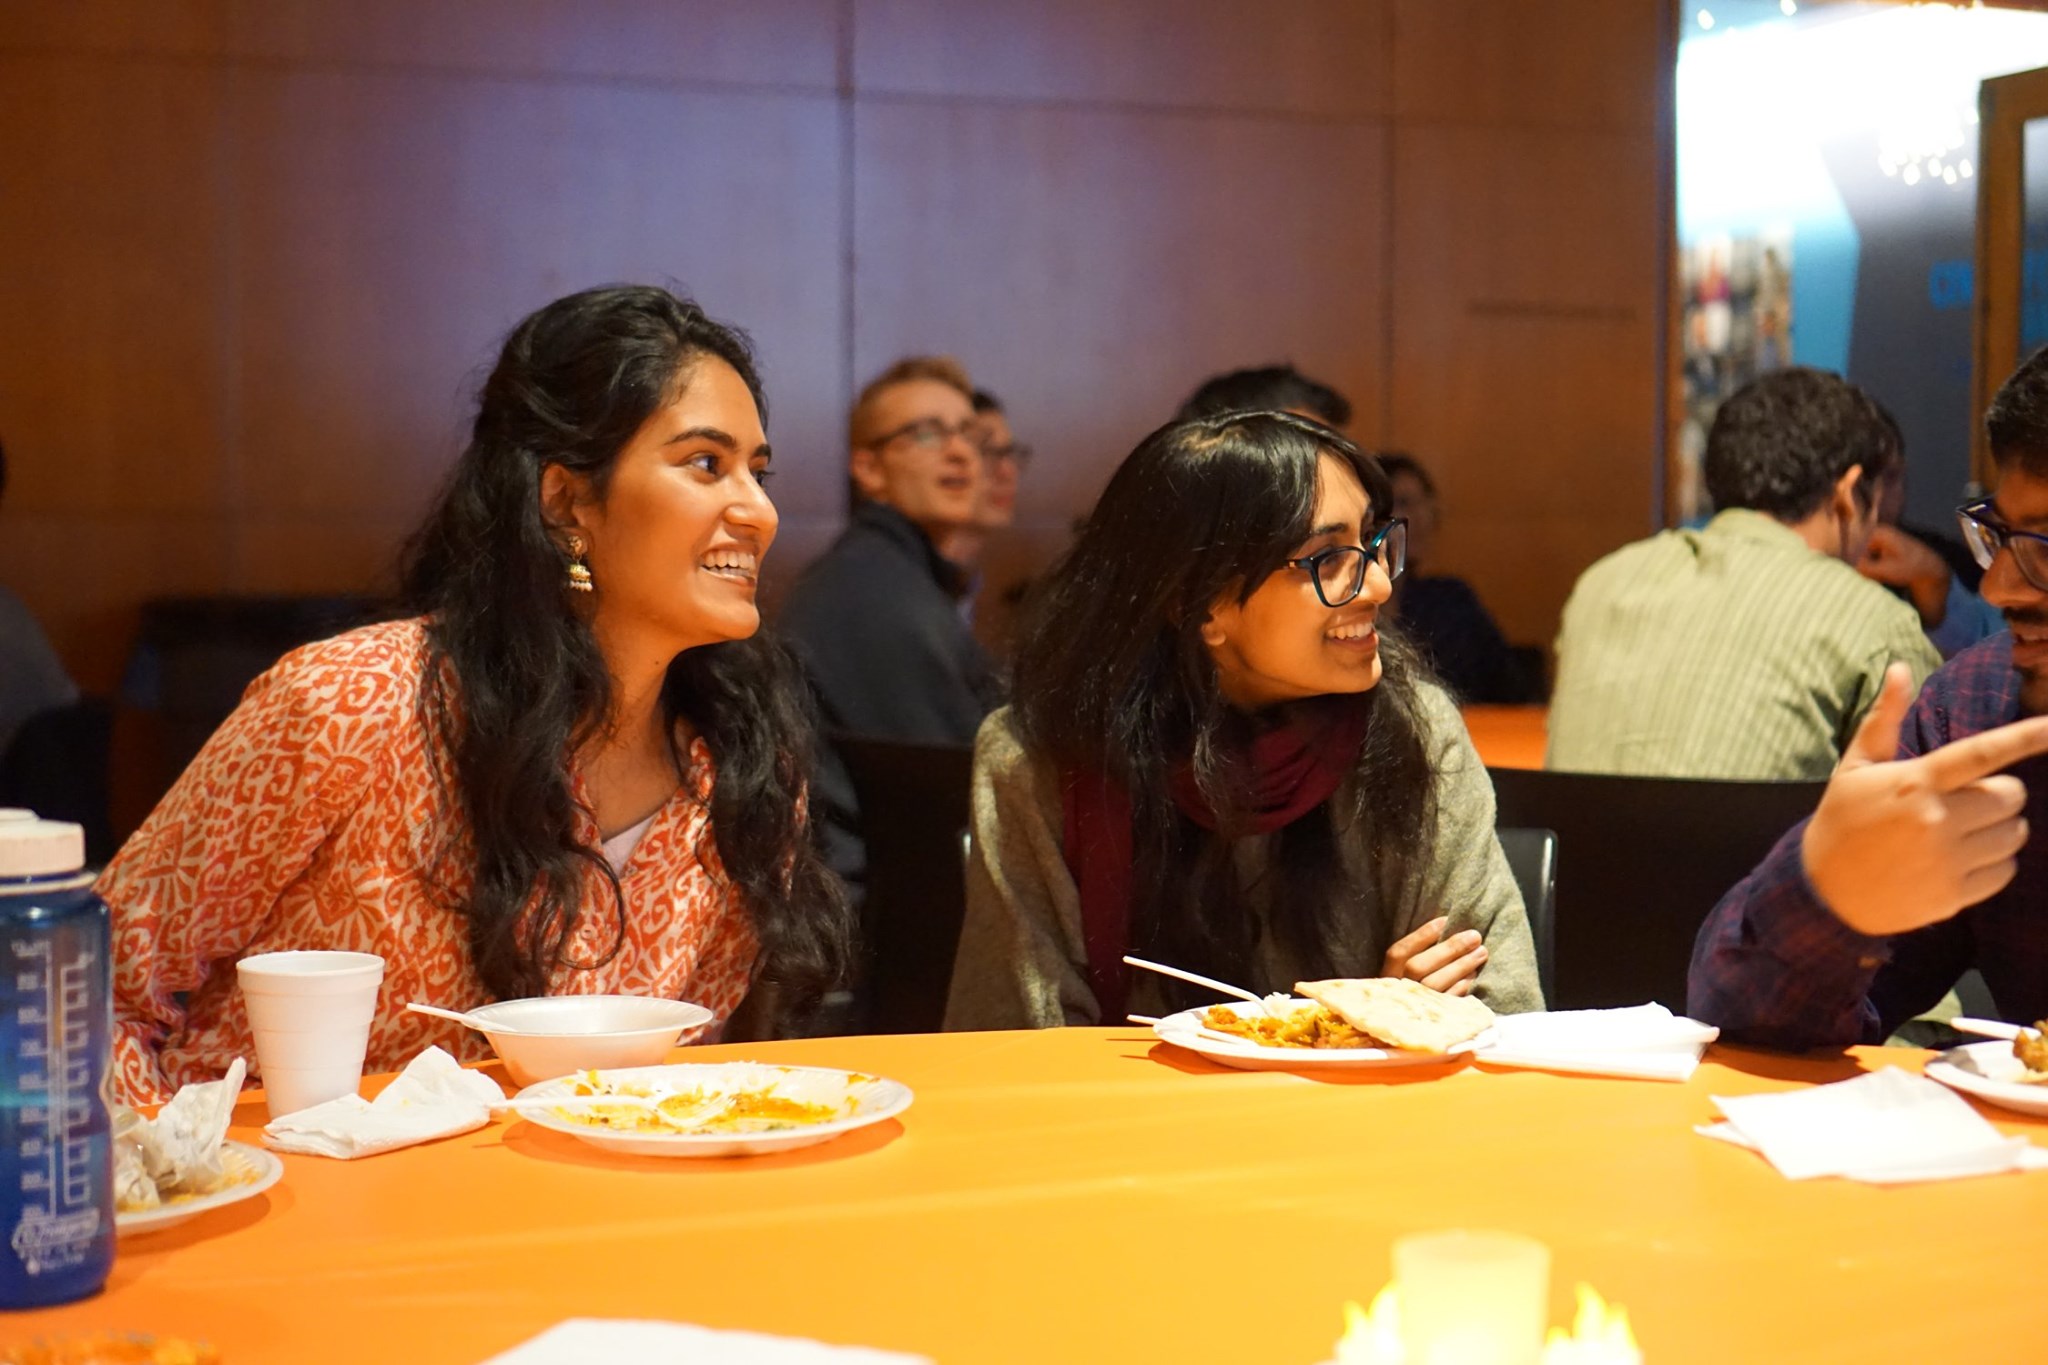 Students enjoy Diwali Banquet held in Friend Center, hosted by the South Asian Students Association (SASA).